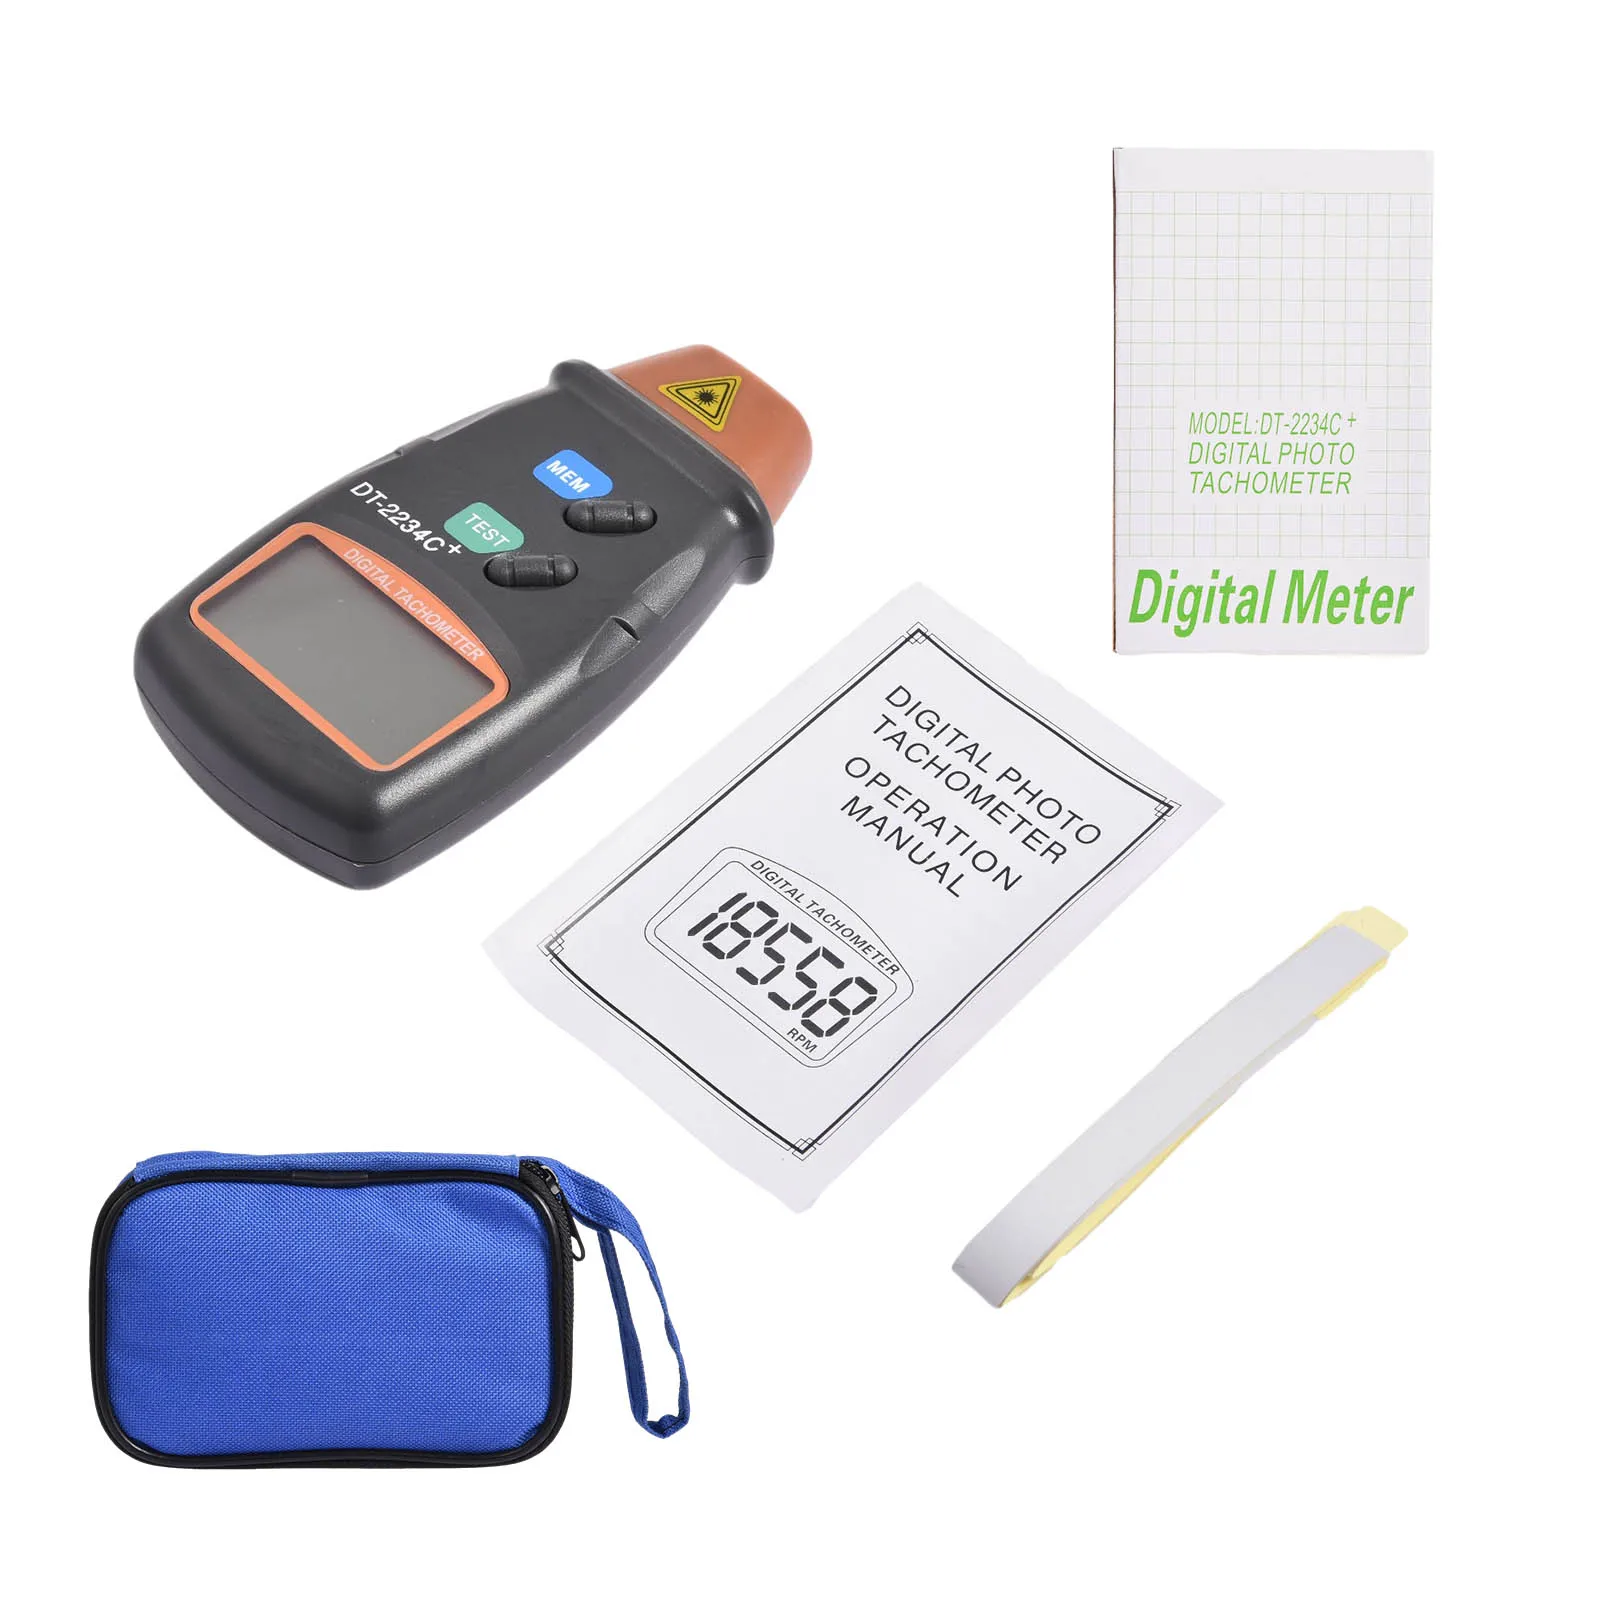 Durable Digital Counter Meter Non-Contact Tachometer Counter for Testing Engine Rotation Speed Gauge Tools Accurate 